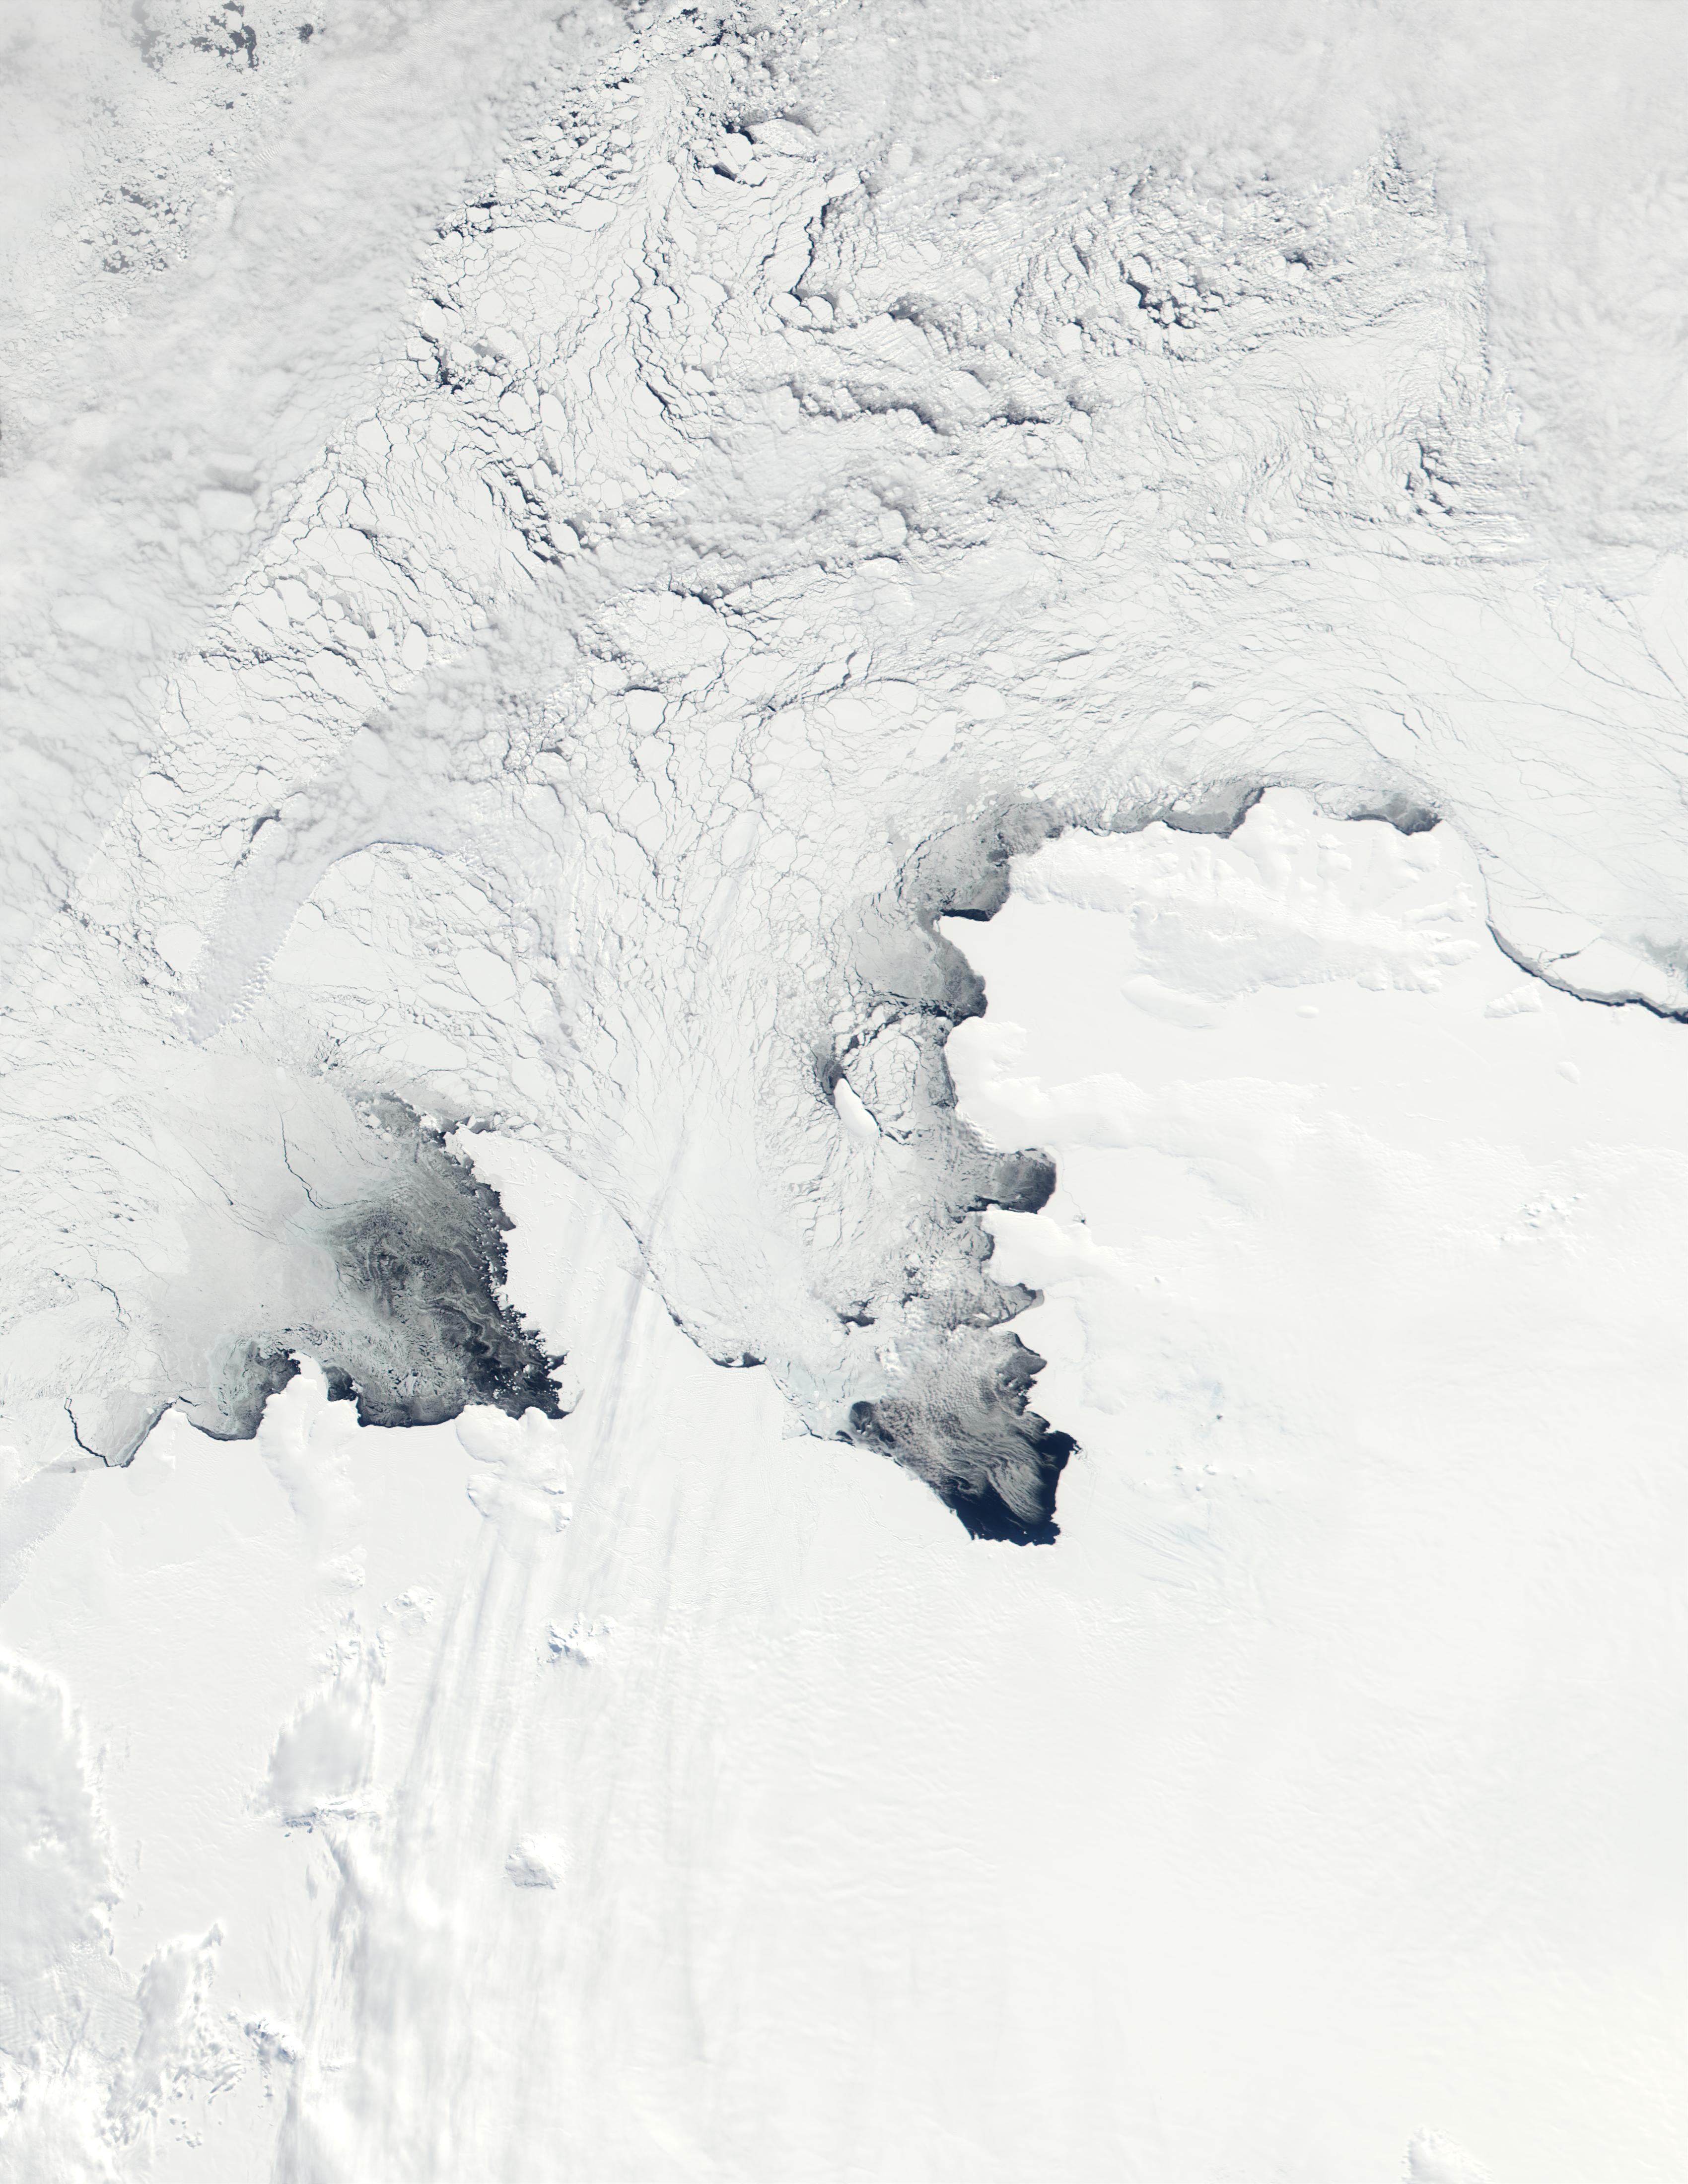 Walgreen Coast and Eights Coast, Antarctica - related image preview